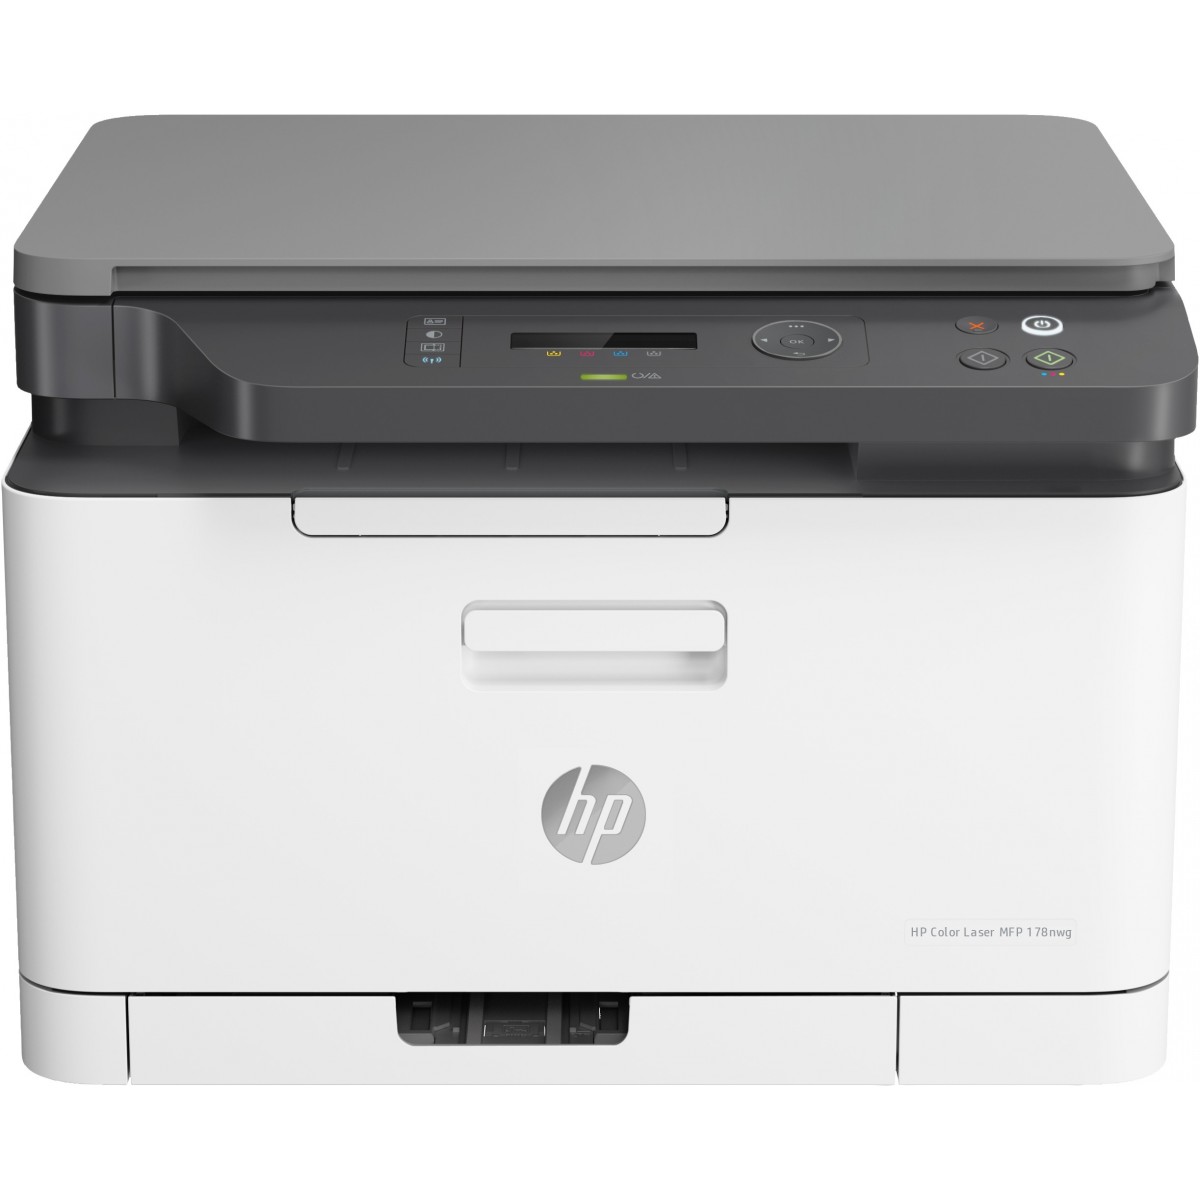 HP Color Laser 178nw - Laser - Colour printing - 600 x 600 DPI - A4 - Direct printing - Black - White